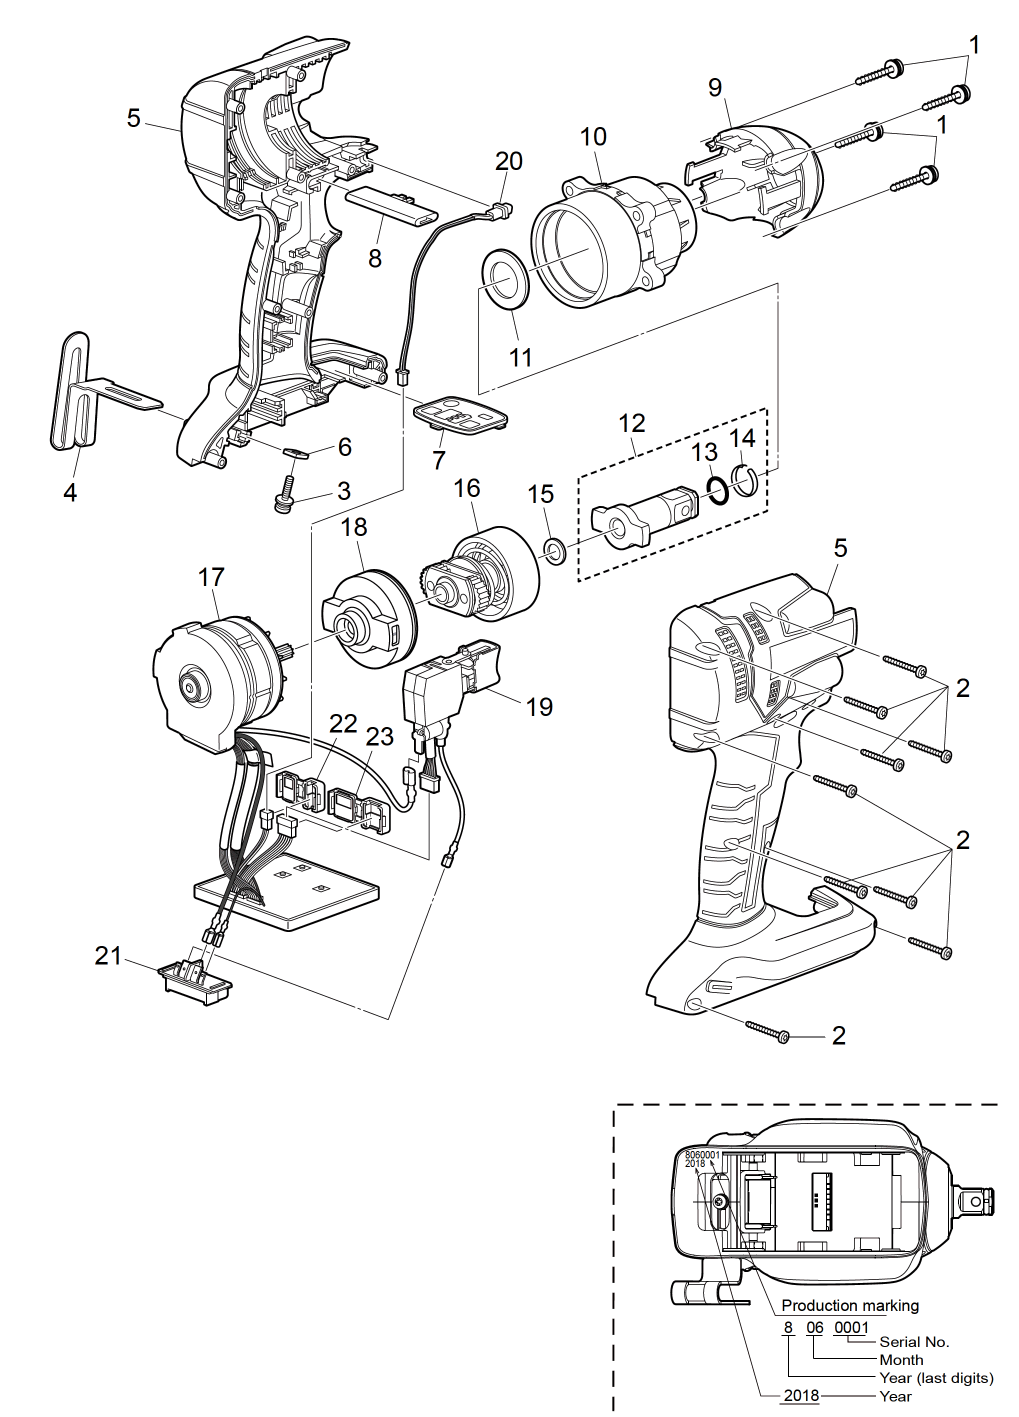 EY75A8: Exploded View